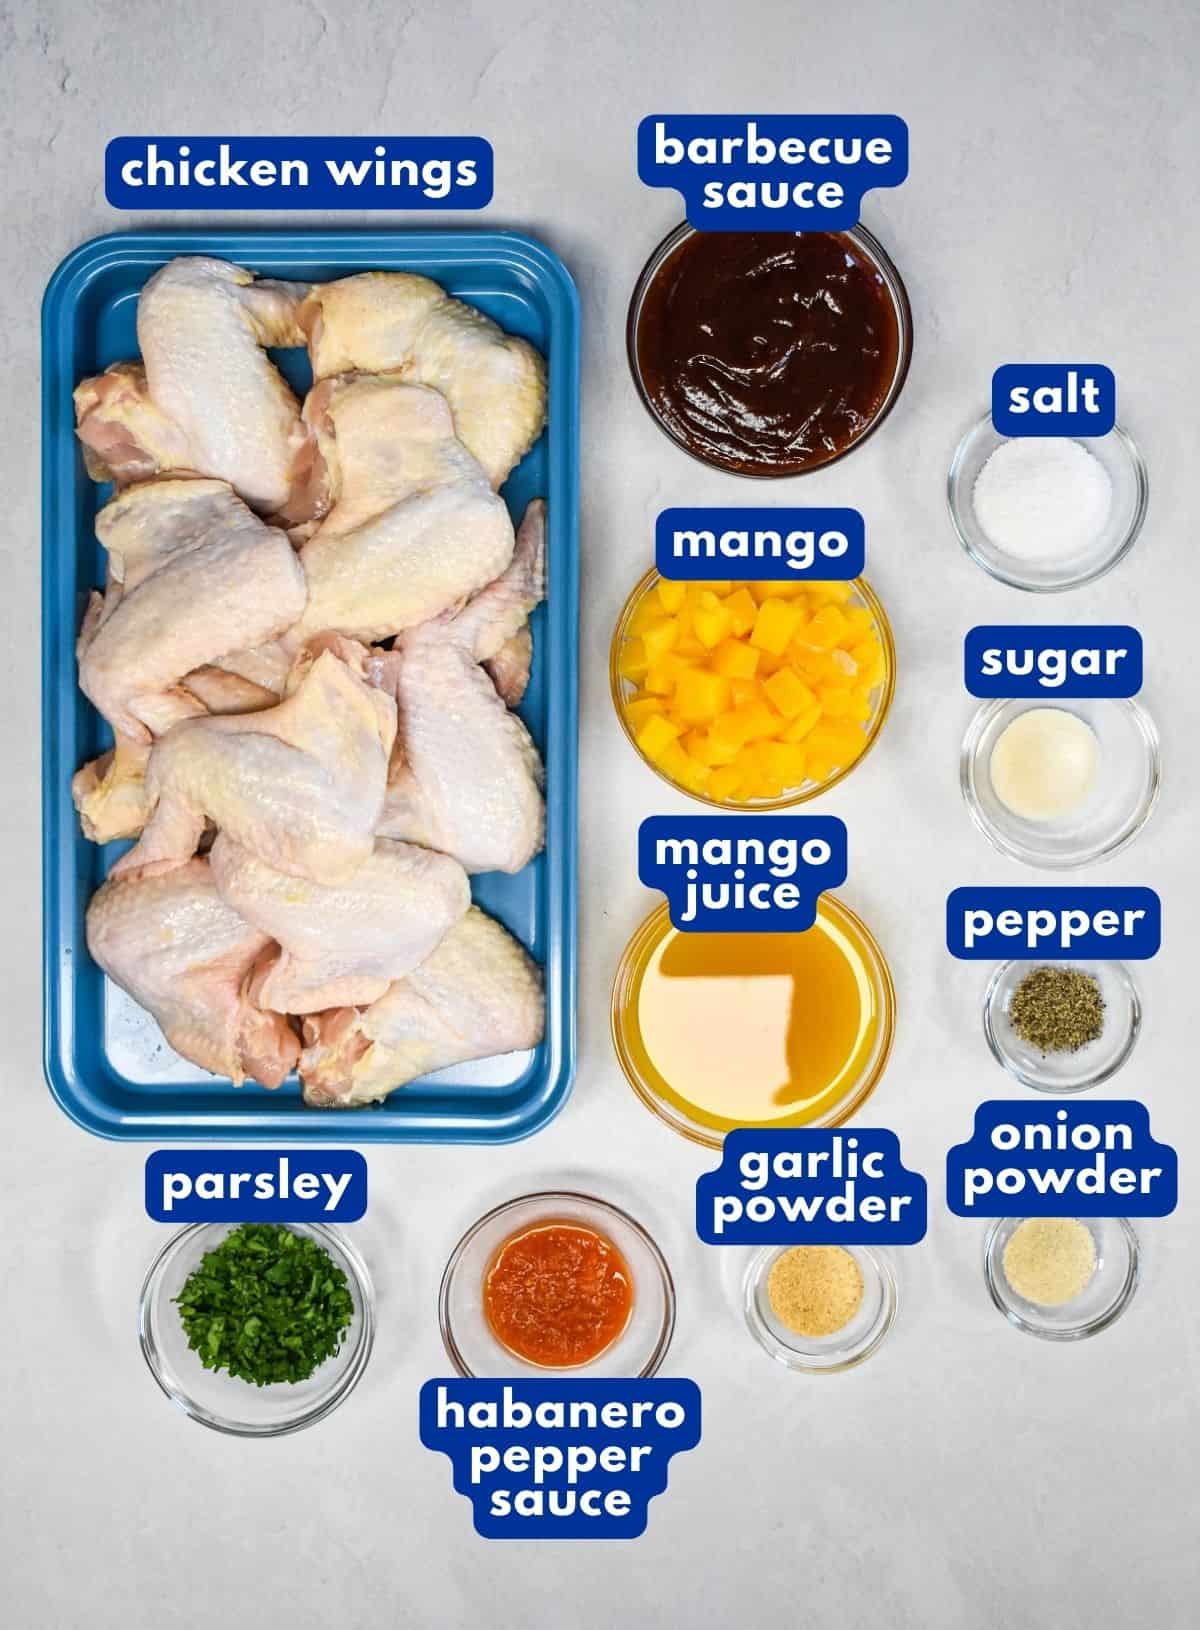 The ingredients for the habanero wings prepped and arranged on a white table with each labeled in blue and white letters.